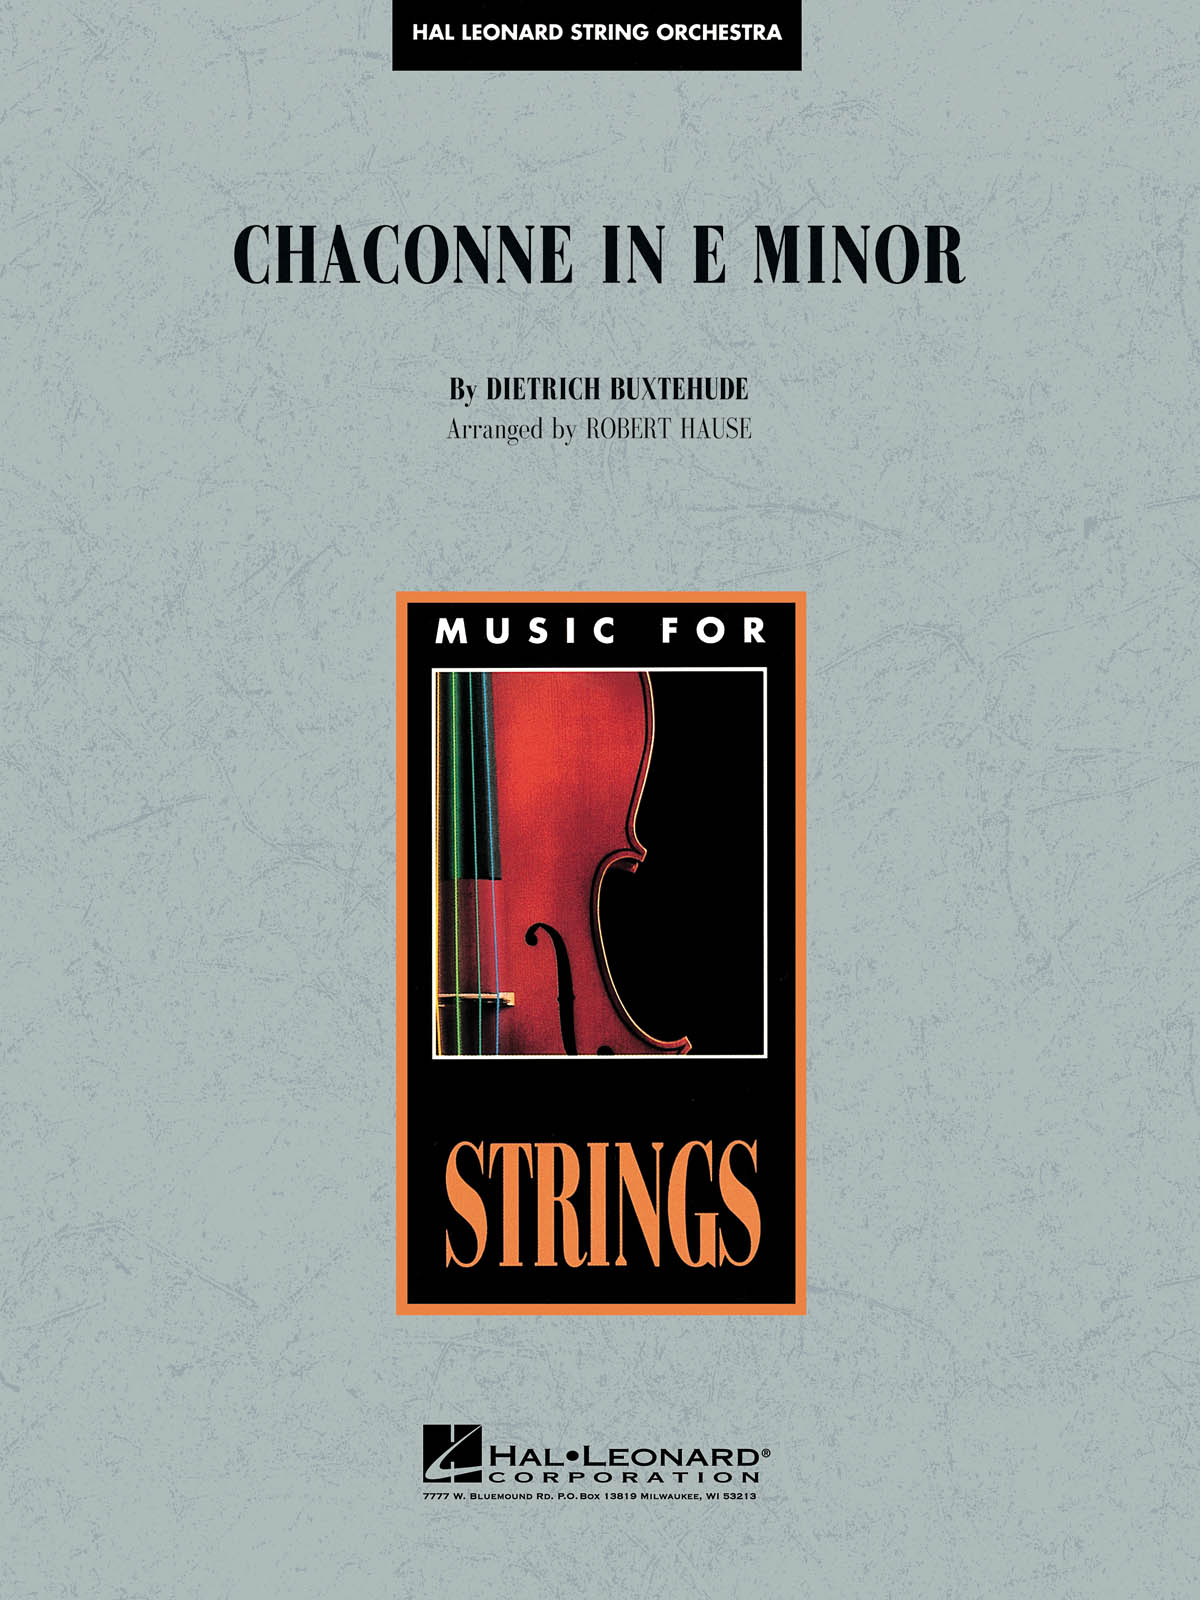 Dietrich Buxtehude: Chaconne in E Minor: String Orchestra: Score & Parts